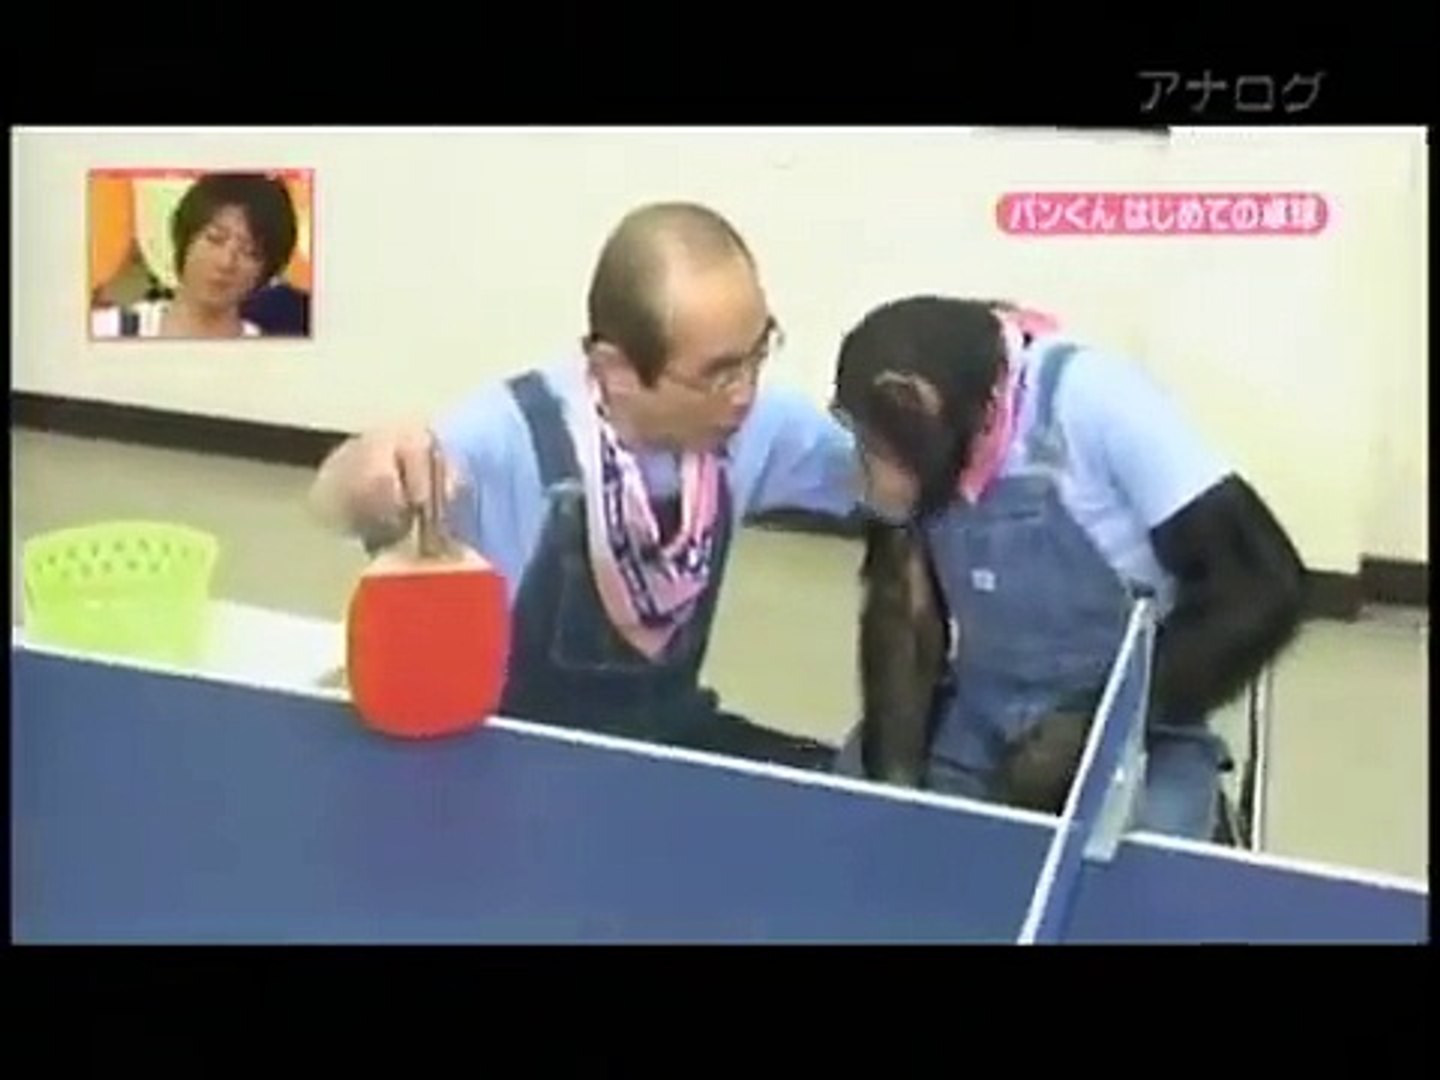 Chimpanzee learning how to play table tennis